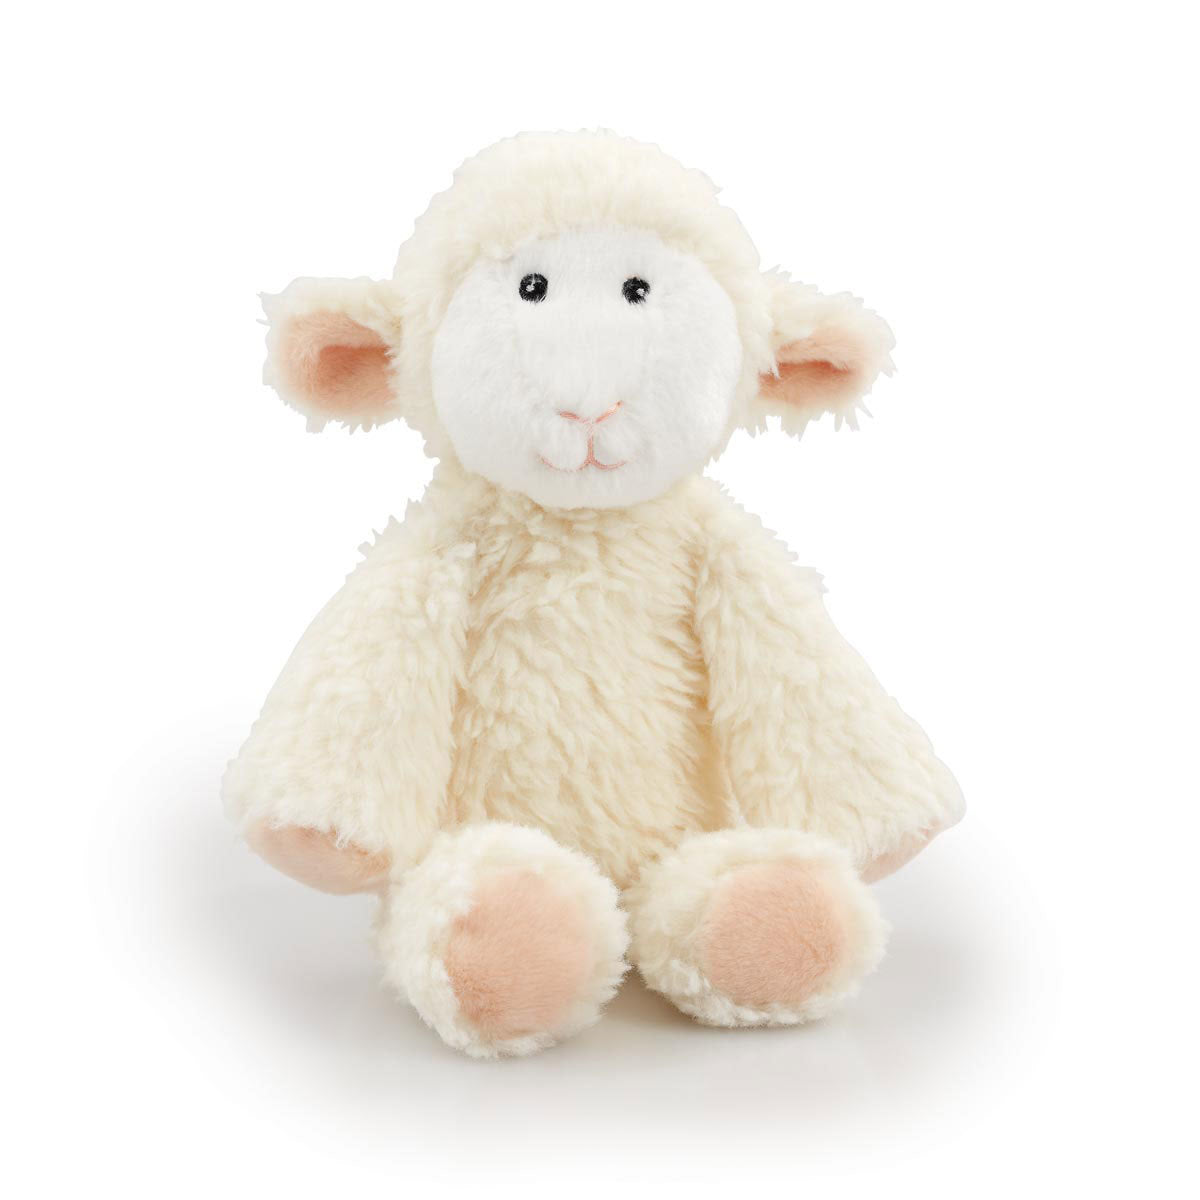 Early Learning Centre Plush Toy - Lamb